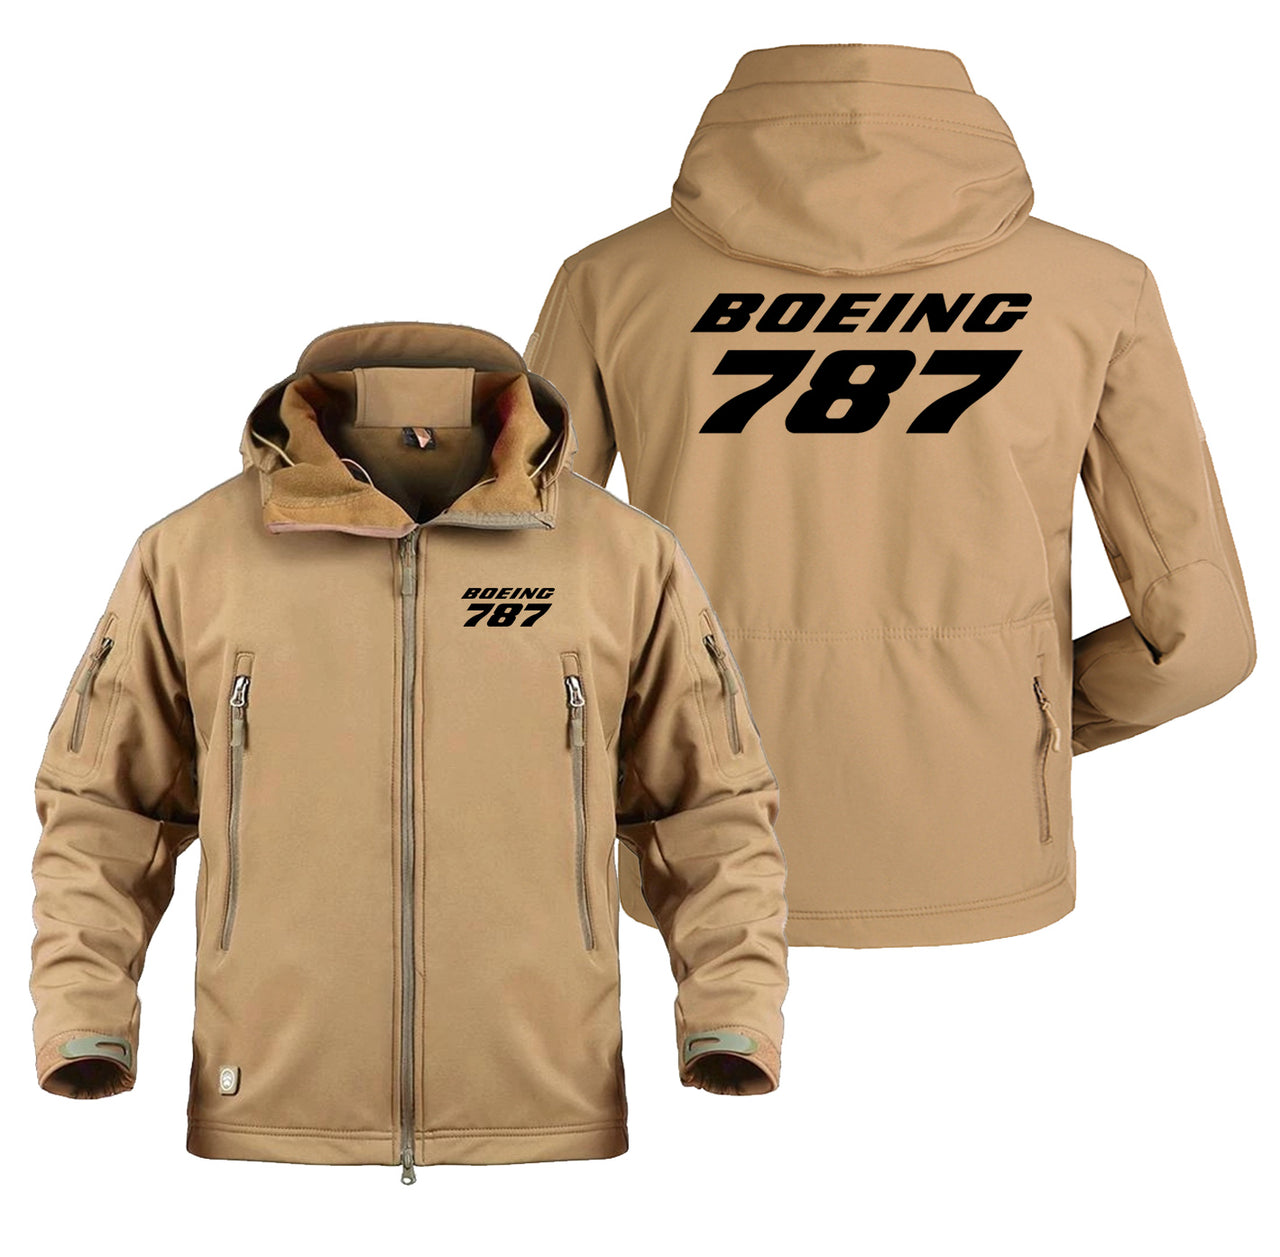 Boeing 787 & Text Designed Military Jackets (Customizable)